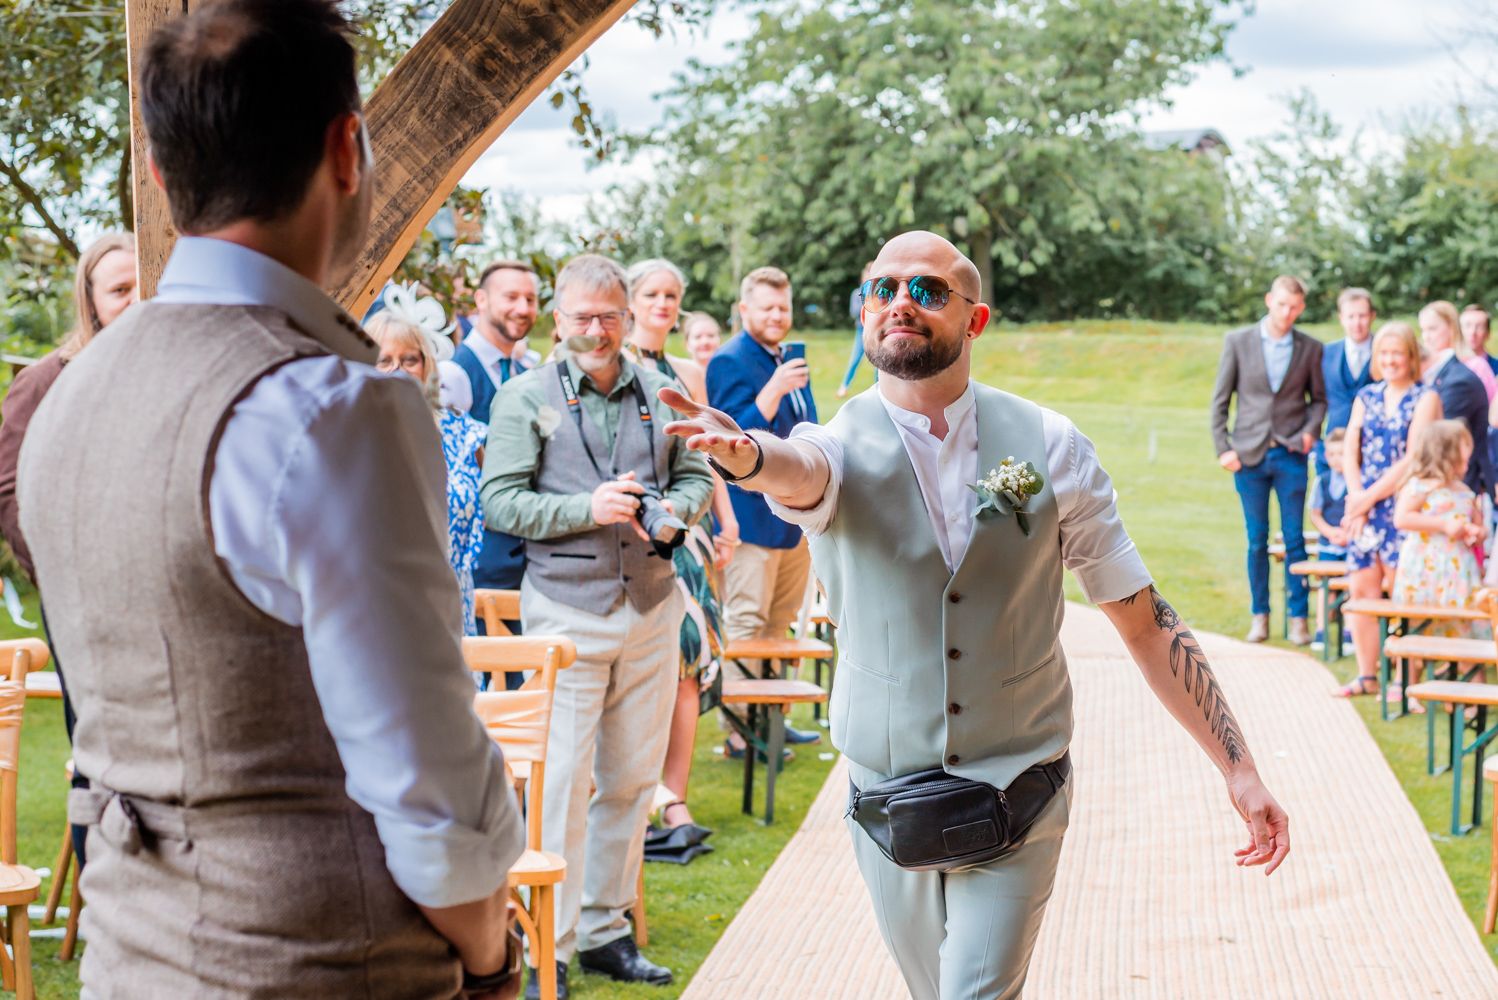 The bride's male best friend throws rose petals towards the groom after walking down the isle. The guests can be seen in the backgroud laughing.